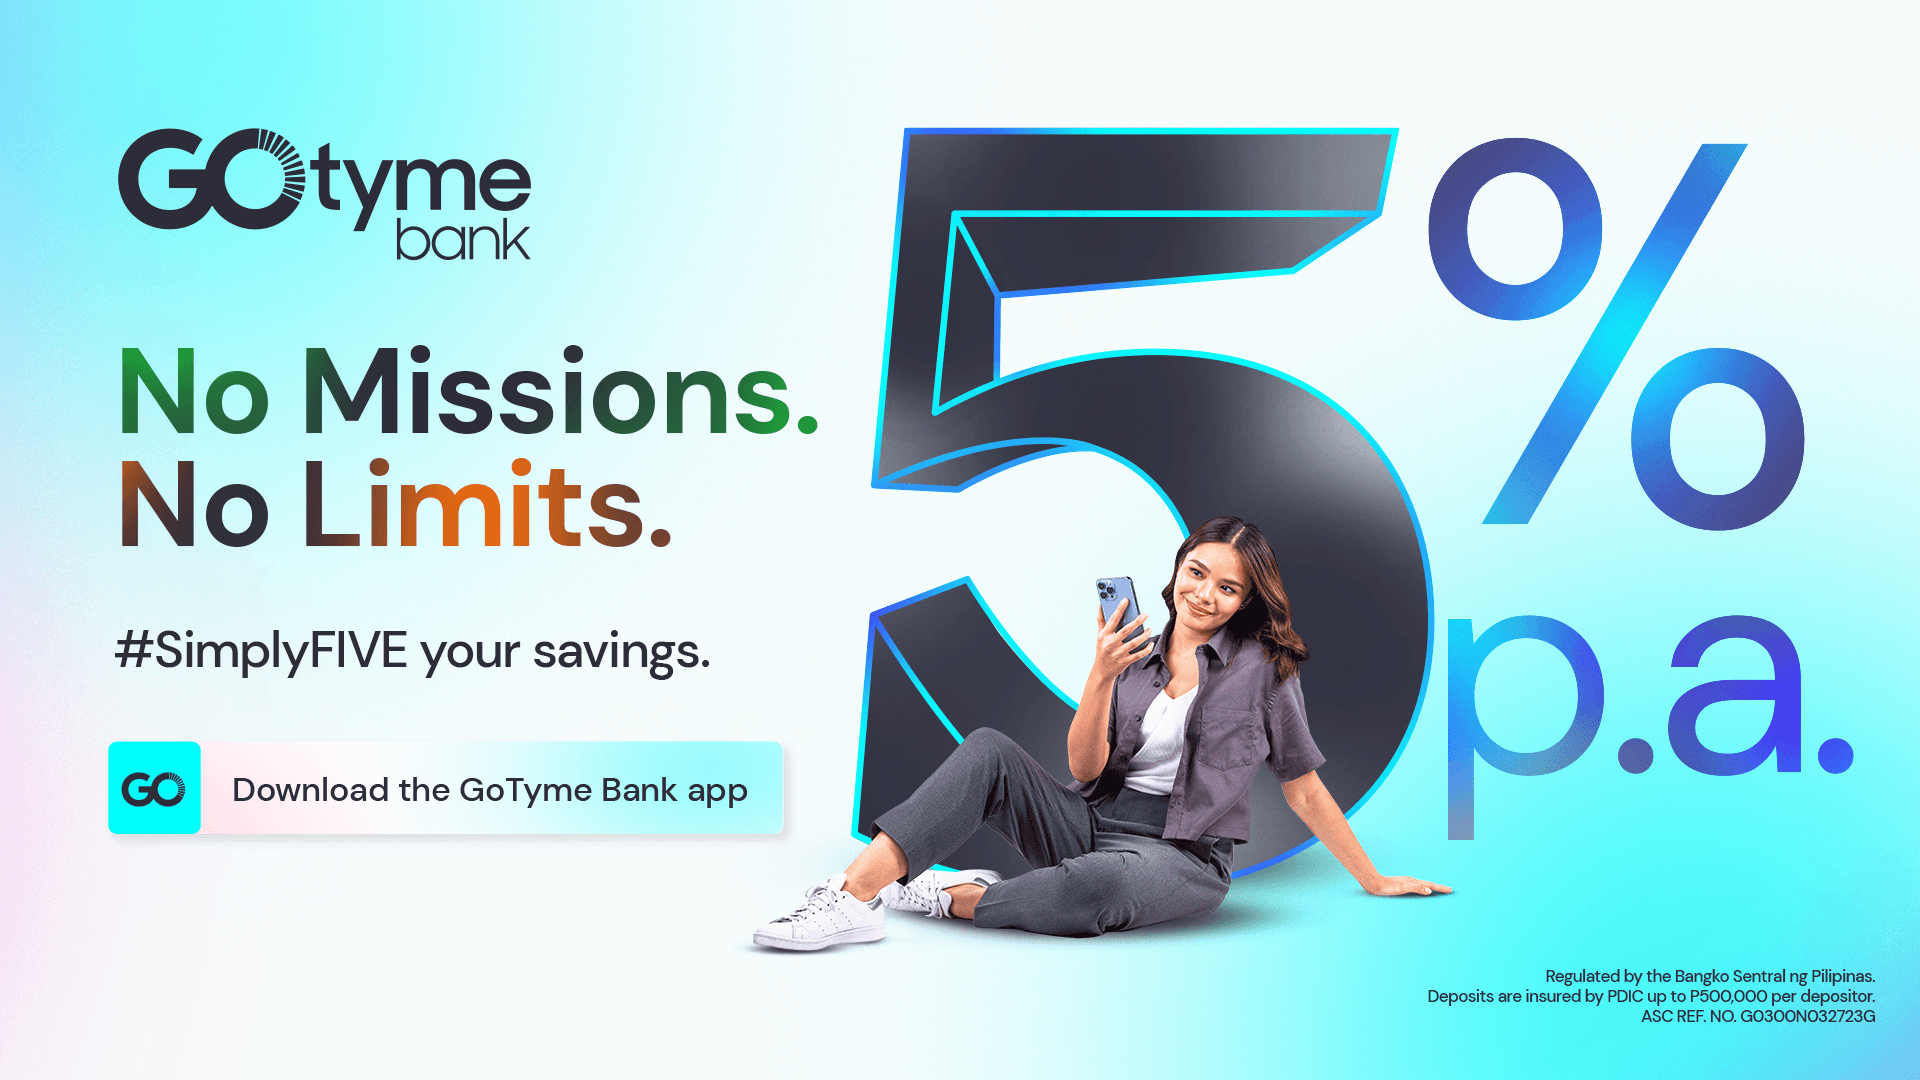 GoTyme Bank’s Go Save Allows Customers Up to 5% p.a. Interest Rate from their Savings Accounts